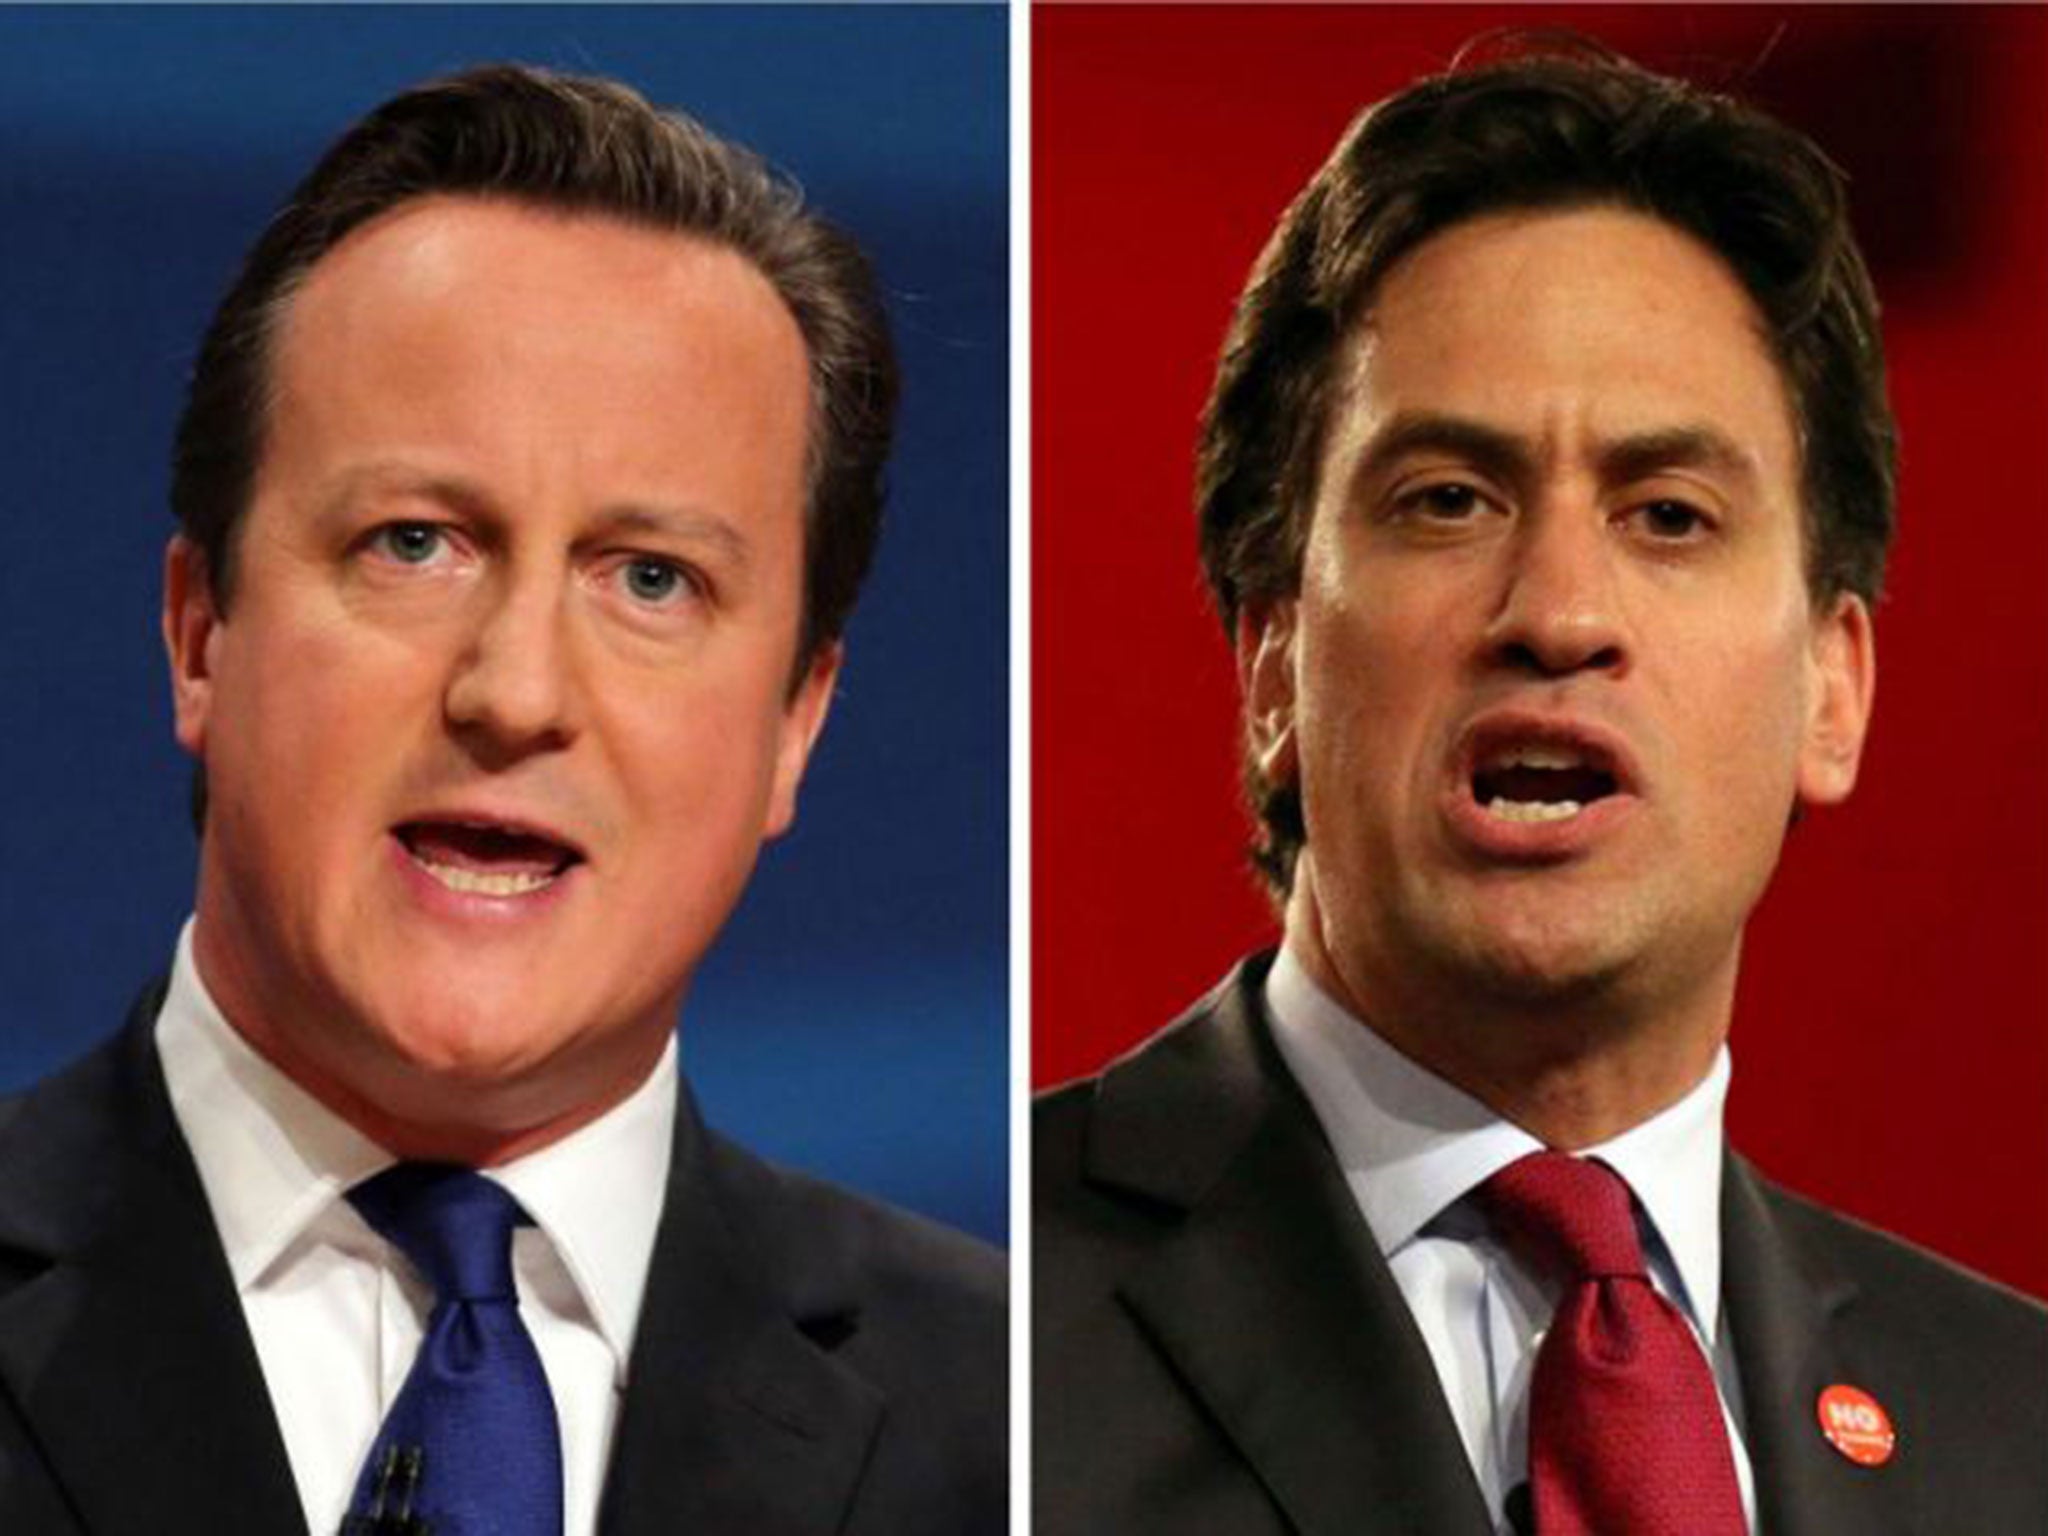 Labour and the Conservatives may be separated by just a small percentage of the vote